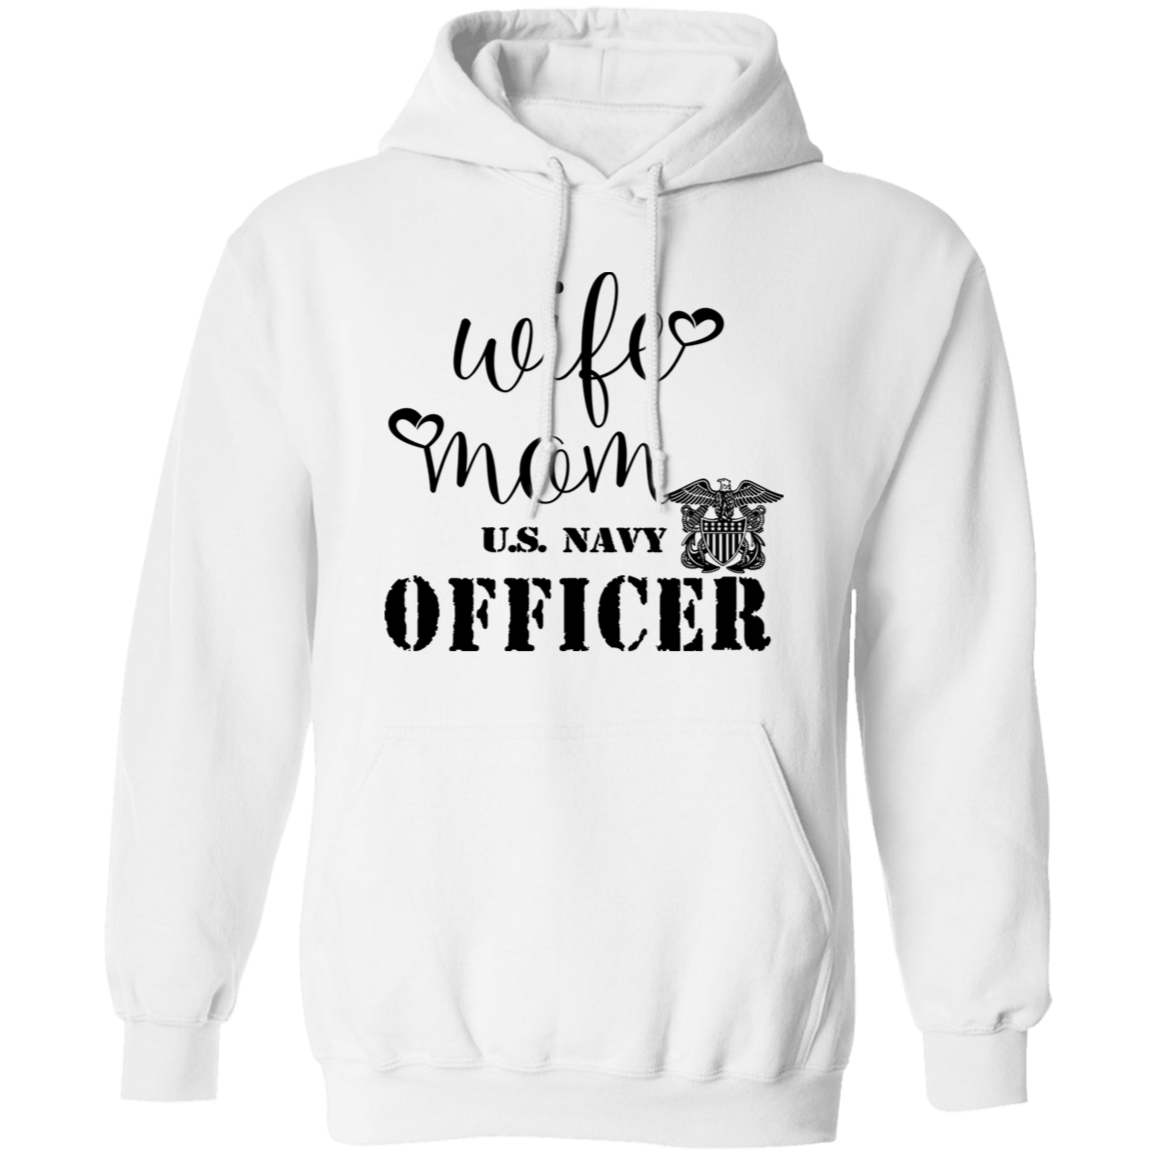 WMO Pullover Hoodie